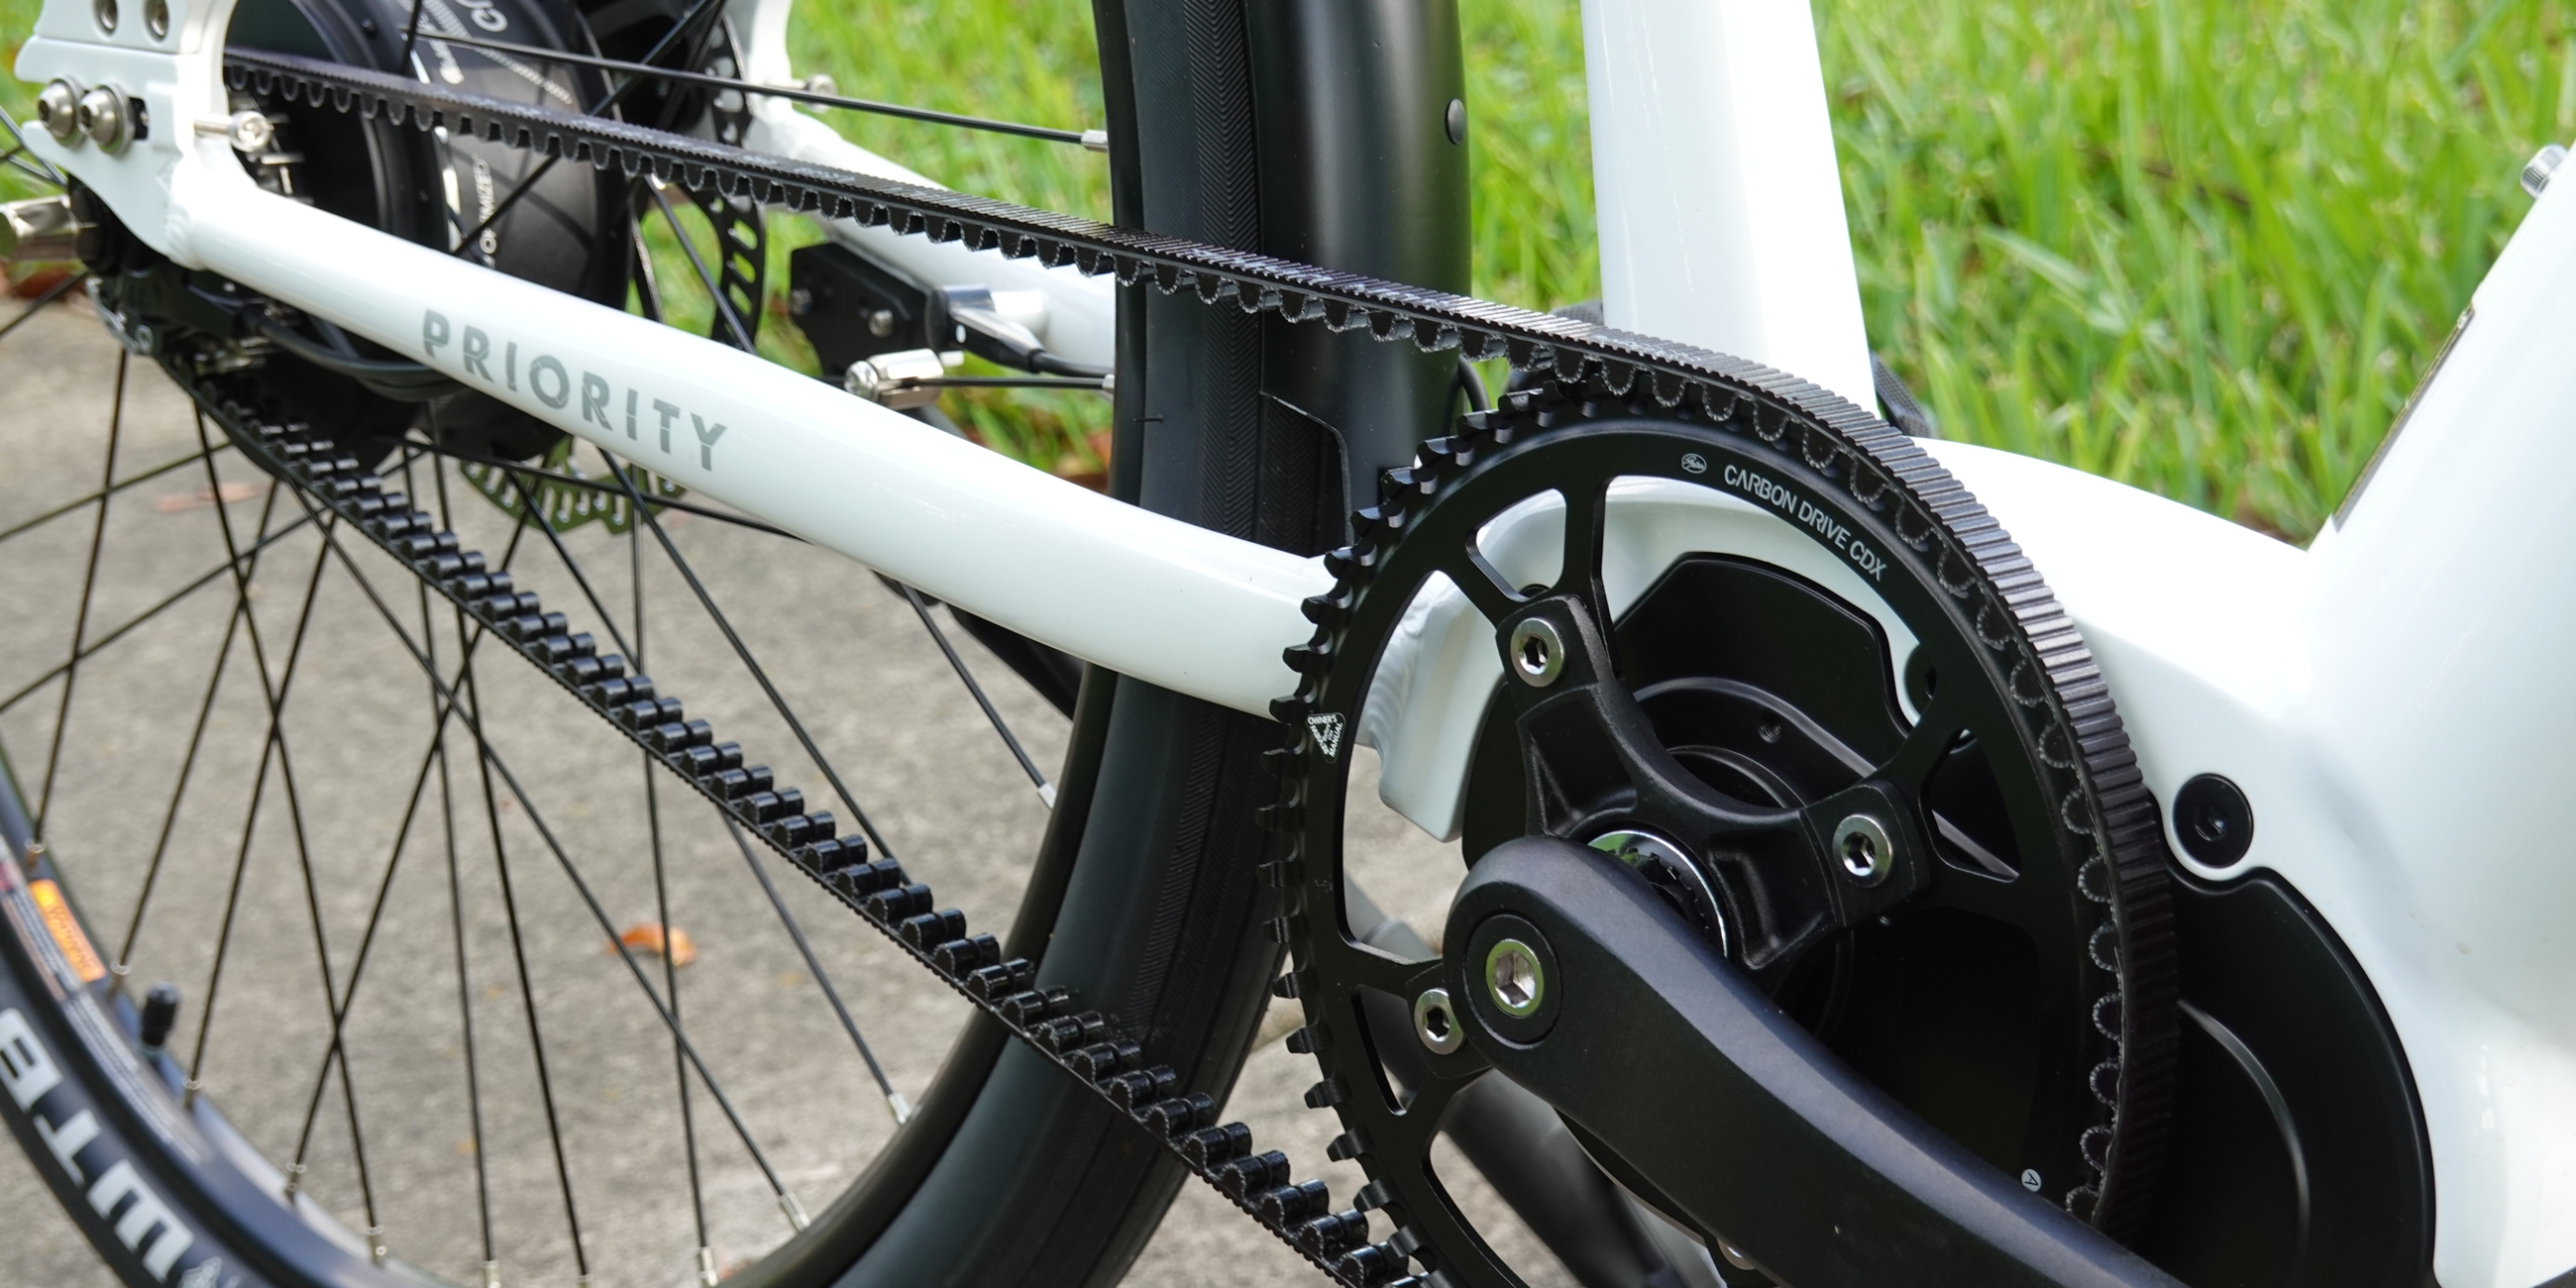 Decision Indirect beneficial Belt drives on electric bicycles - what are the pros and cons? | Electrek